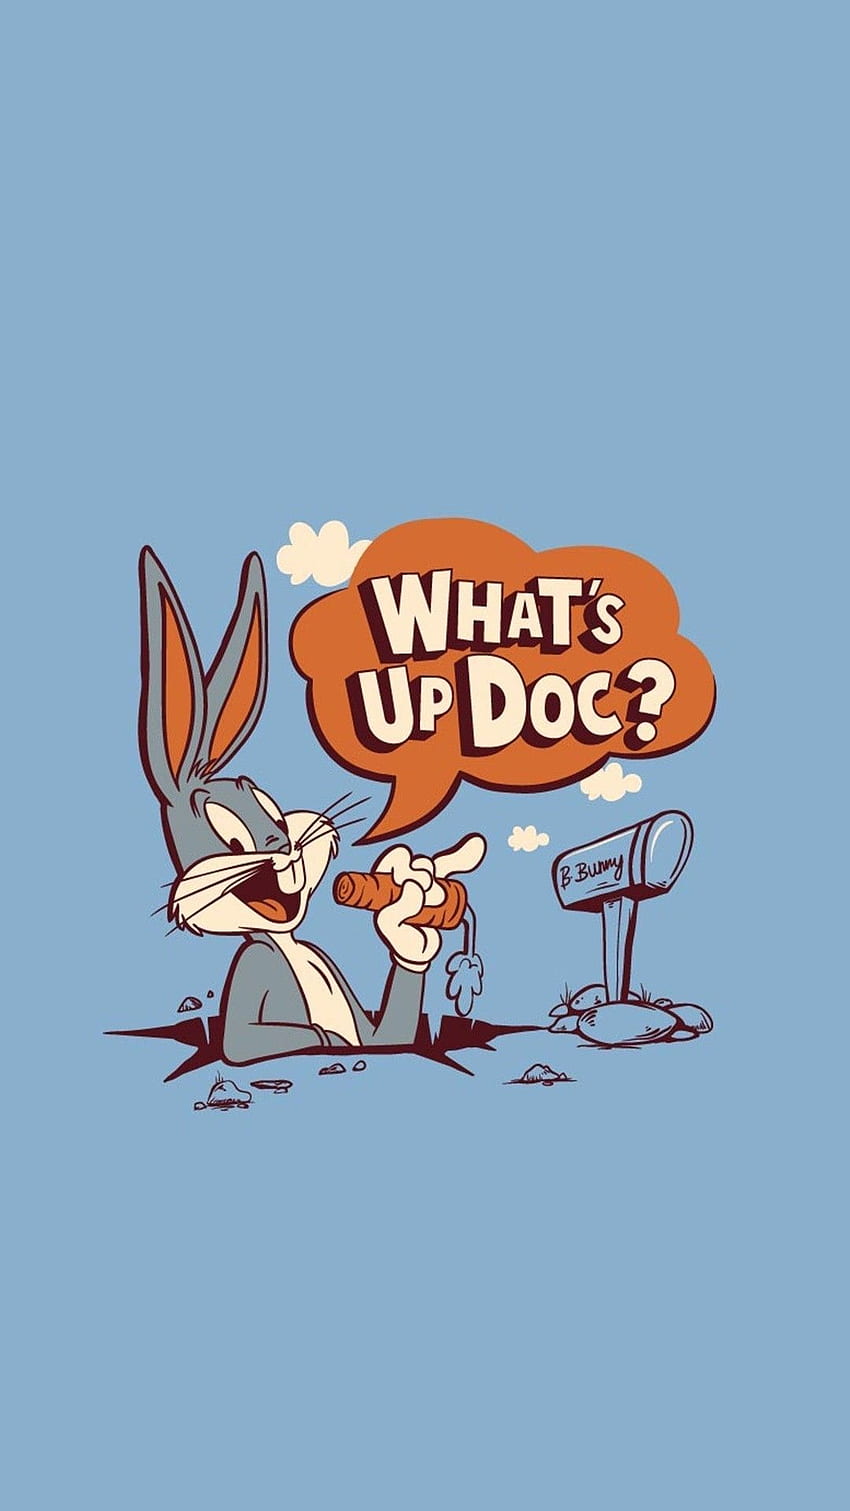 1920x1080px, 1080P Free download | Bugs Bunny. Bunny , Looney tunes ...